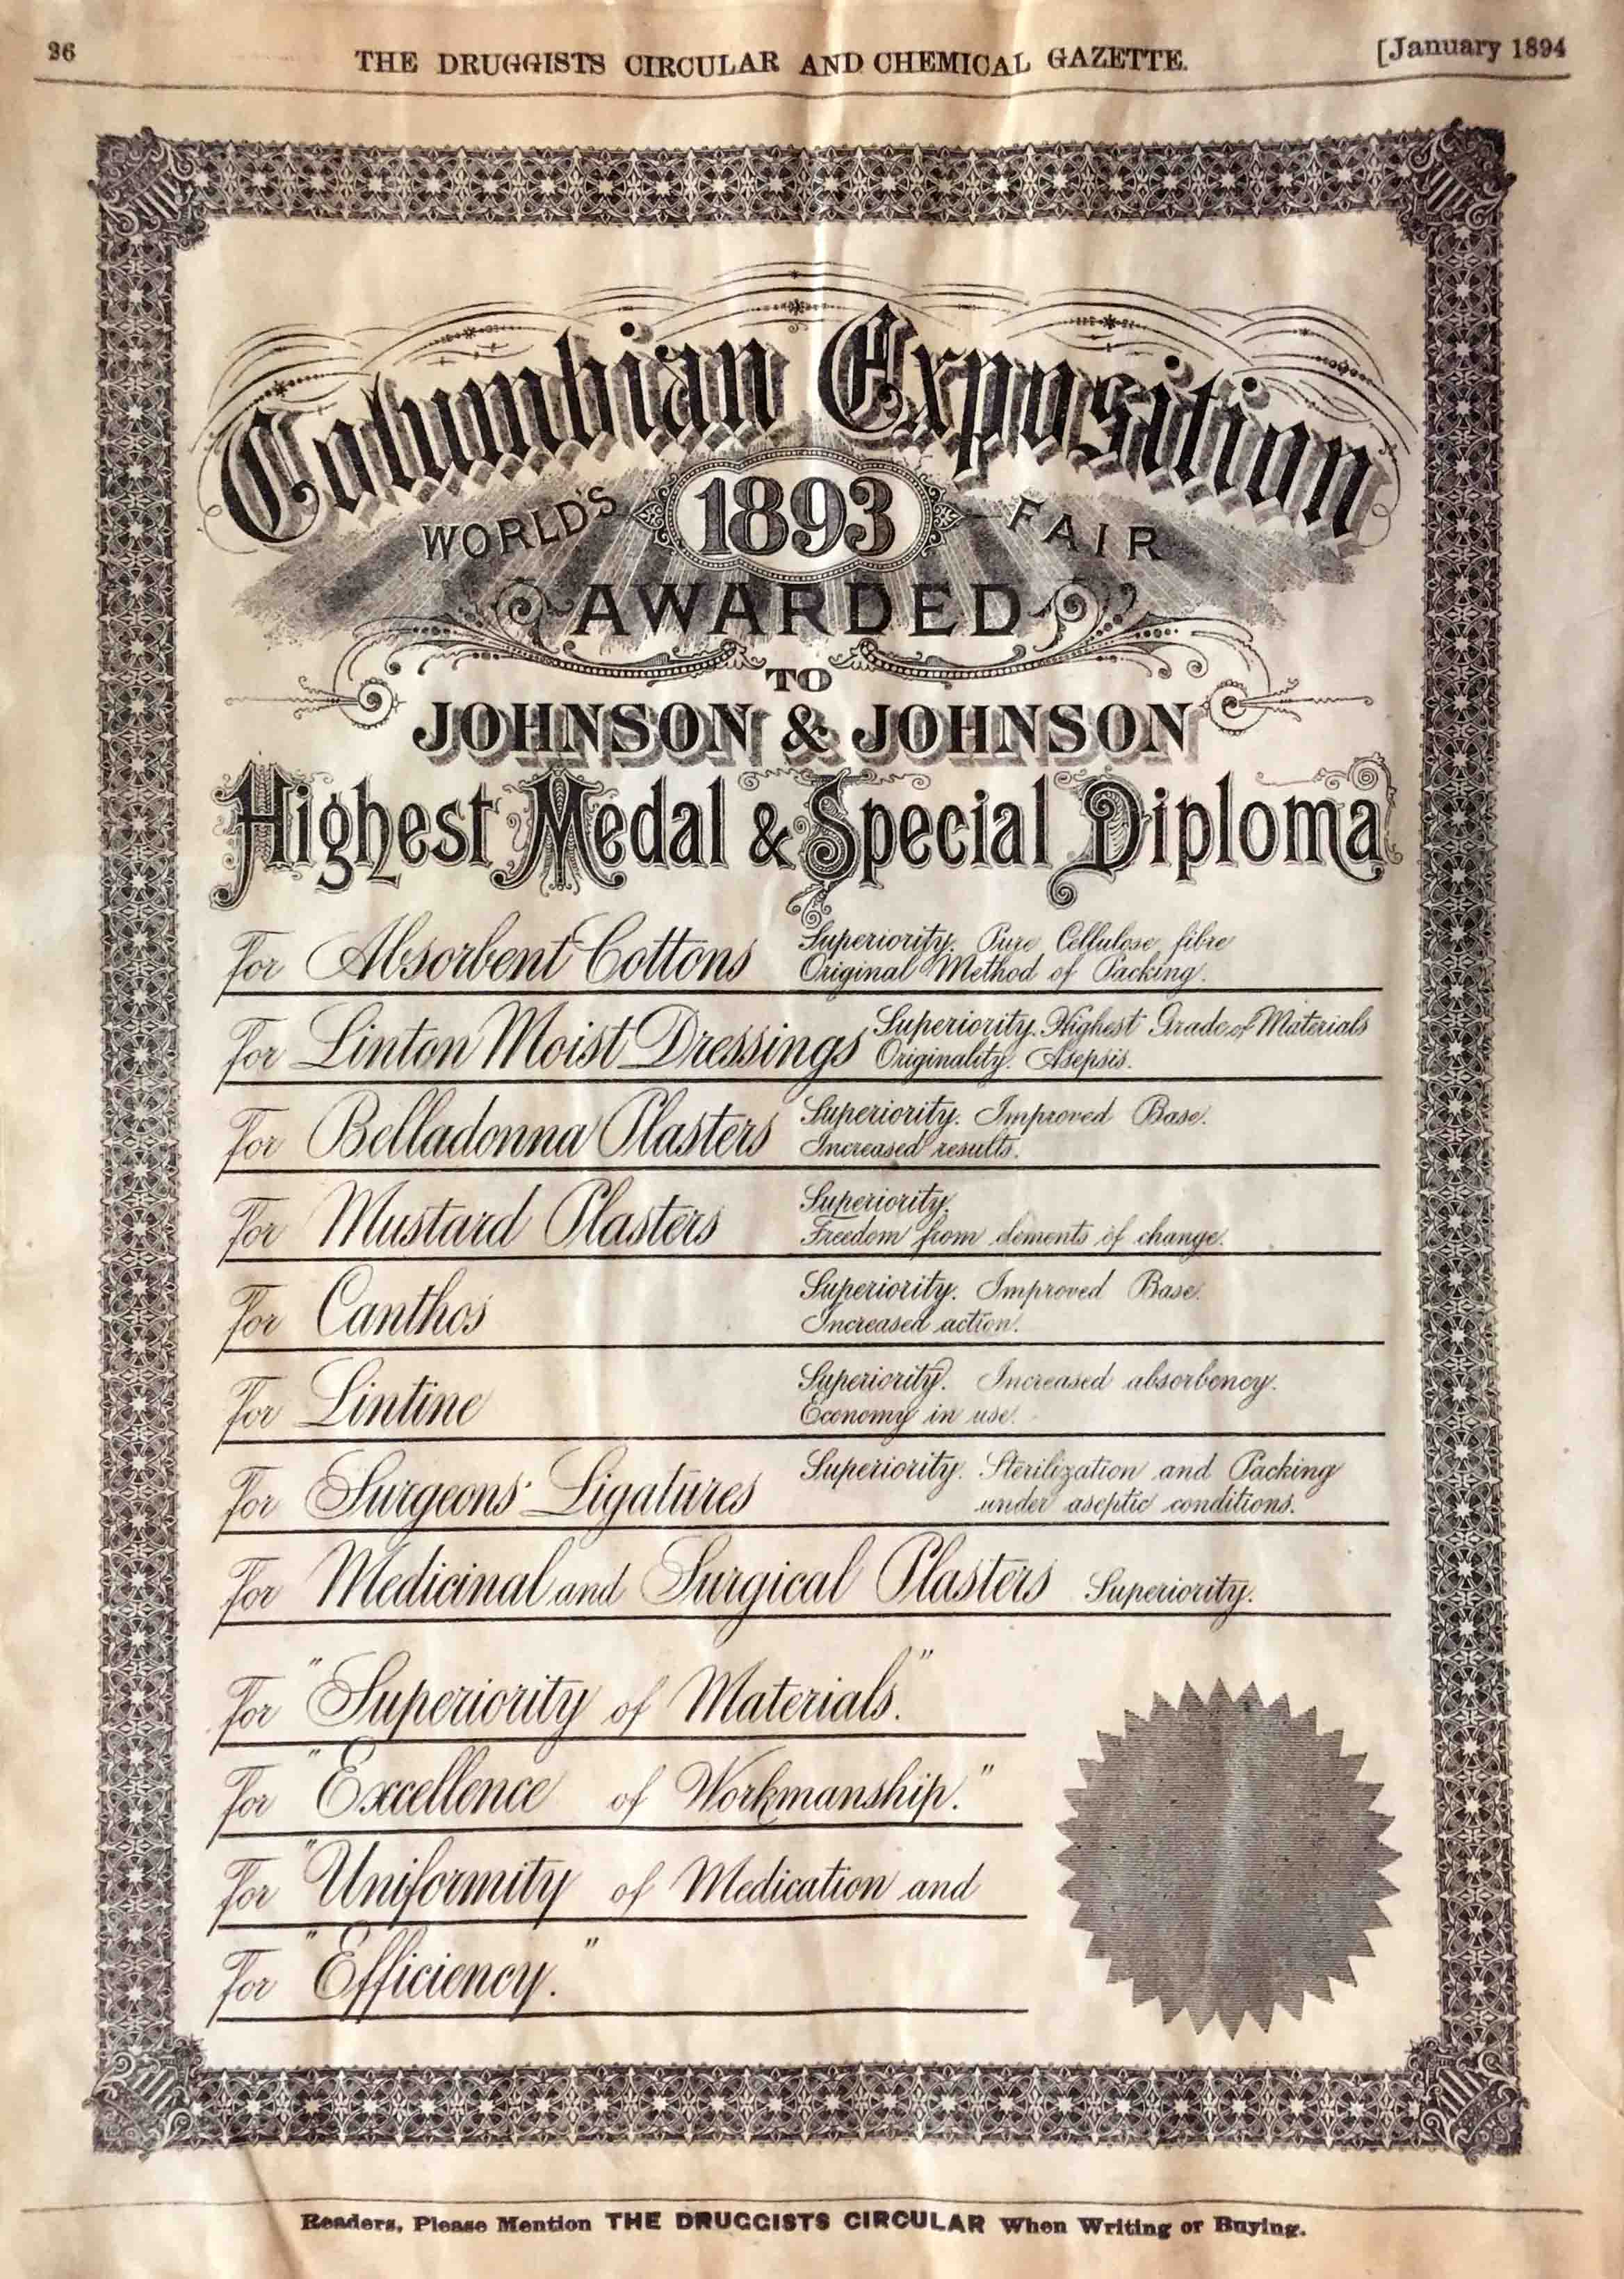  The Award for Excellence earned by Johnson & Johnson at the 1893 Chicago World’s Fair.  Image: Johnson & Johnson Archives.